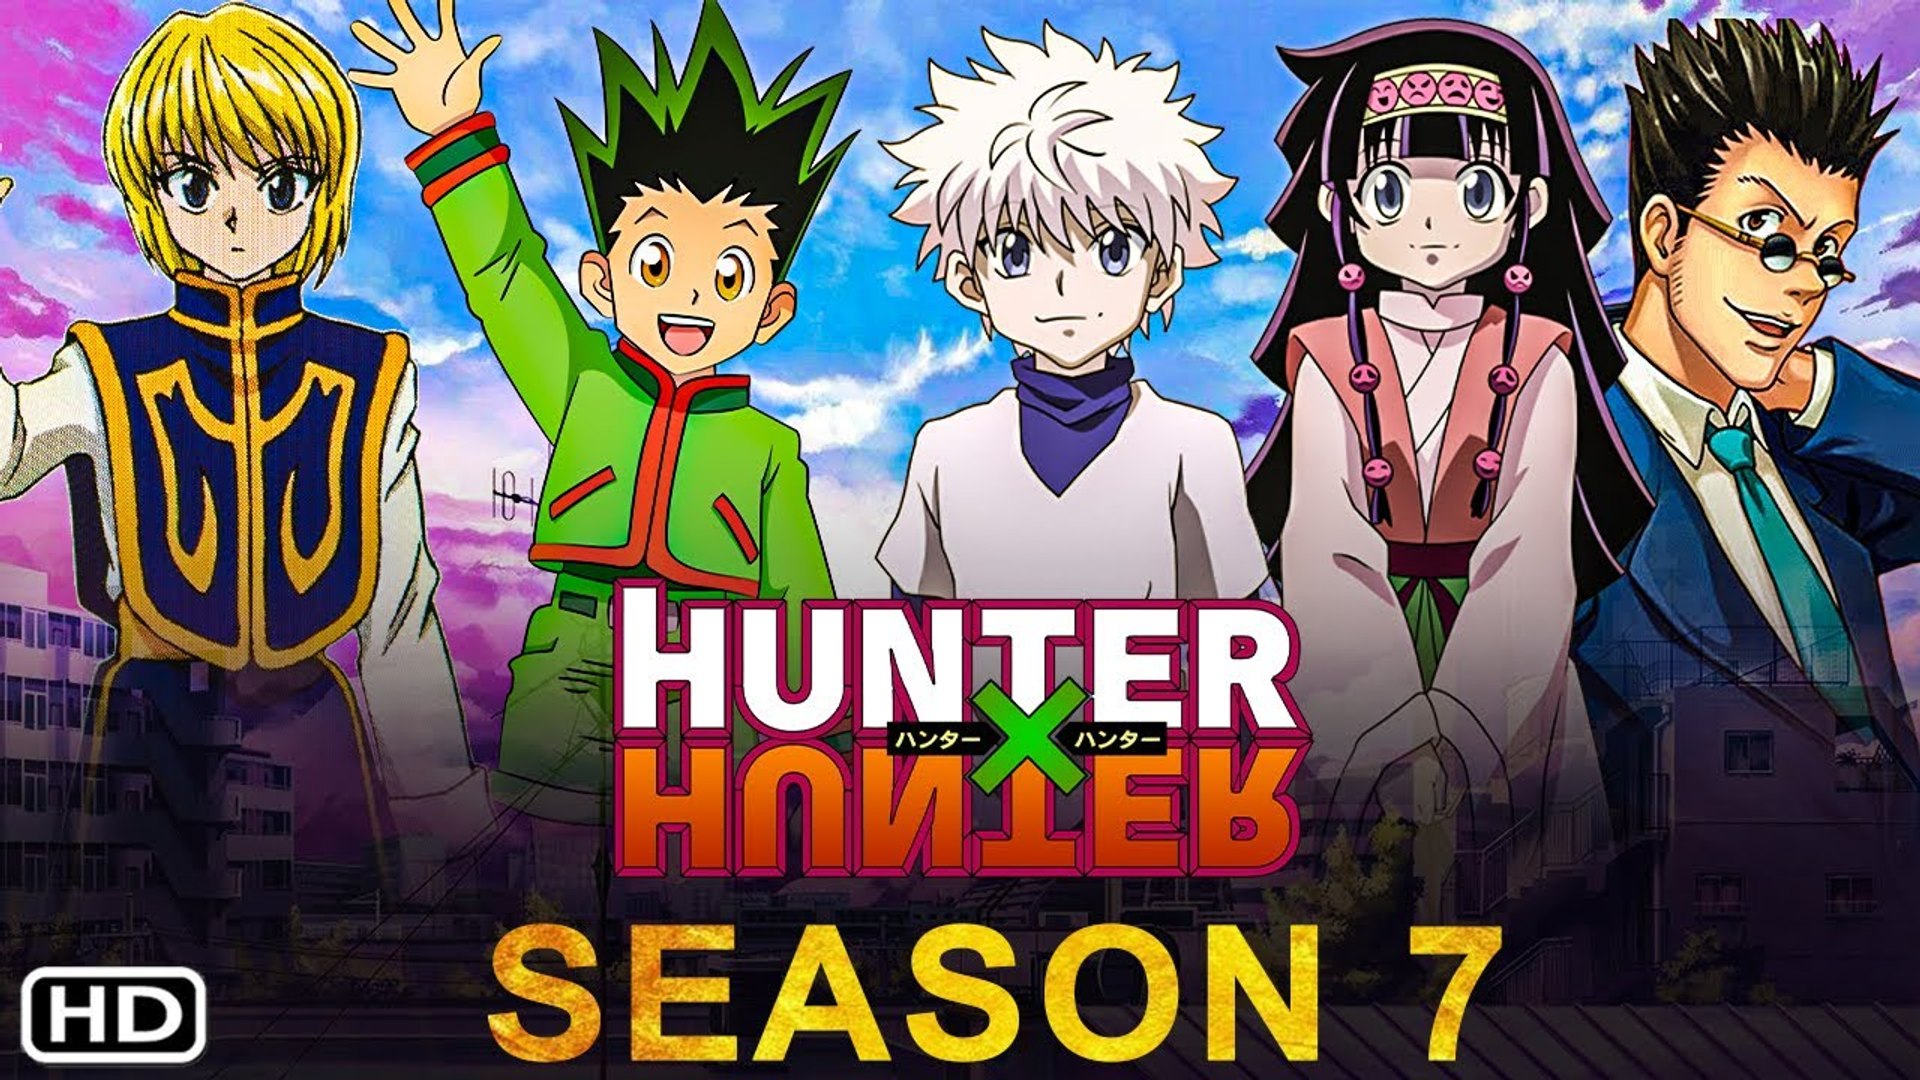 Netflix: Will Hunter x Hunter Season 7 Is Going To Get Released or Not?  Check Here!